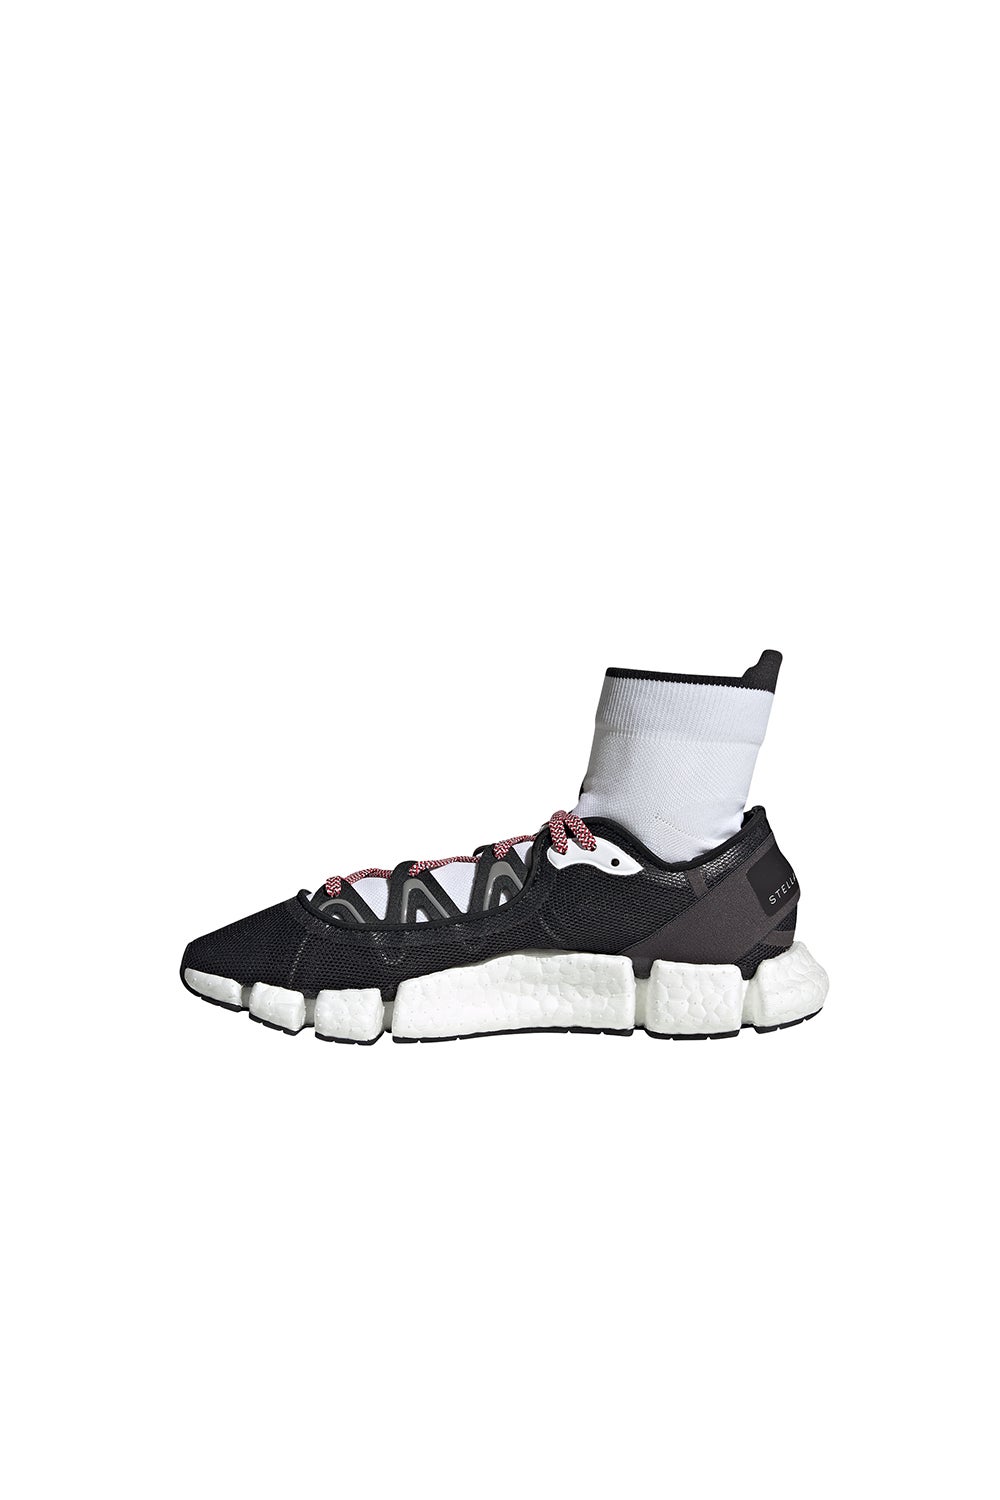 adidas by Stella McCartney Climacool Vento Shoes Core Black